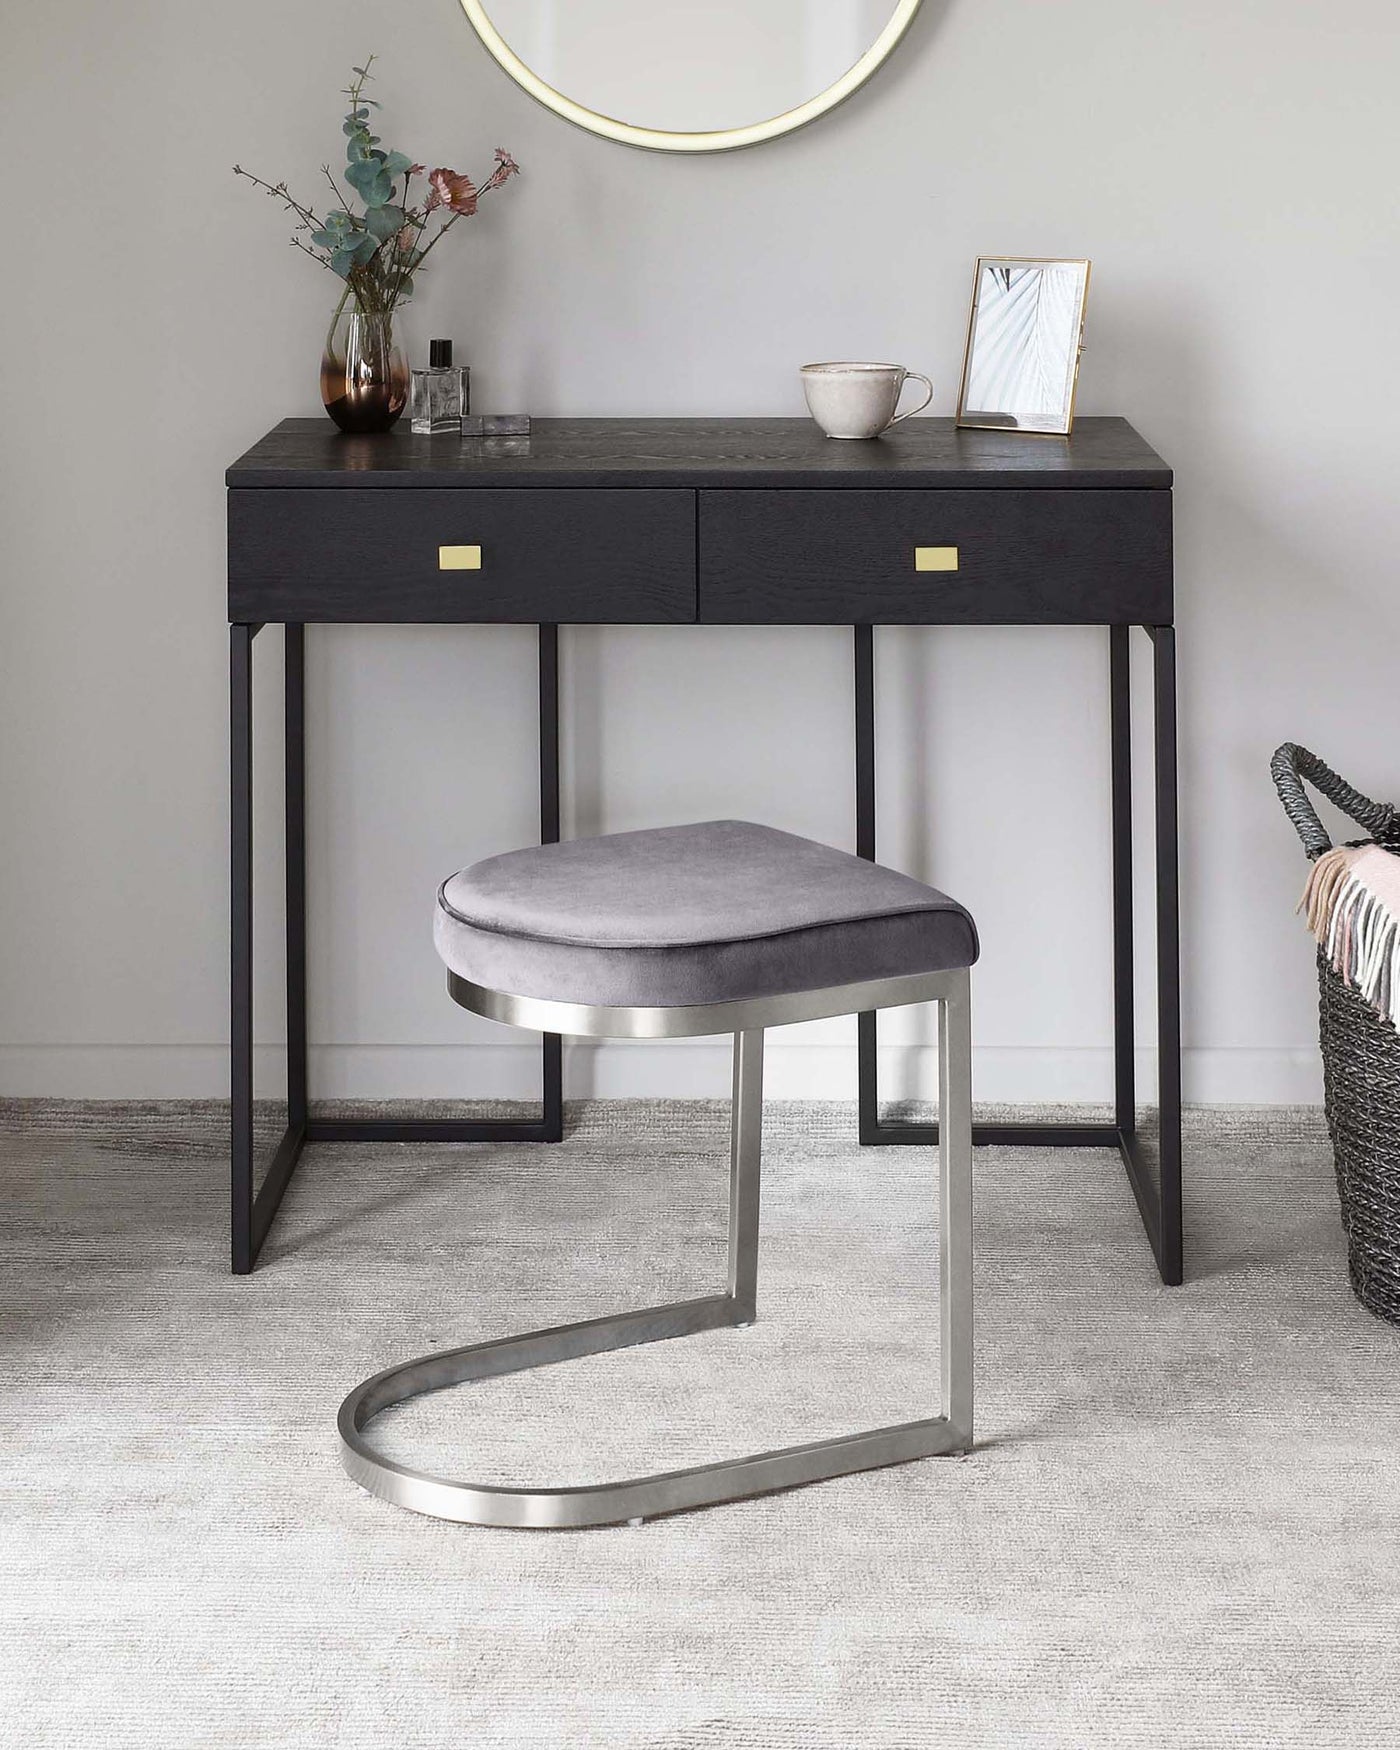 A modern black wooden console table with two drawers and brass drawer pulls, paired with a round grey upholstered stool with a unique u-shaped metallic base, set in an elegant room with a light grey carpet.